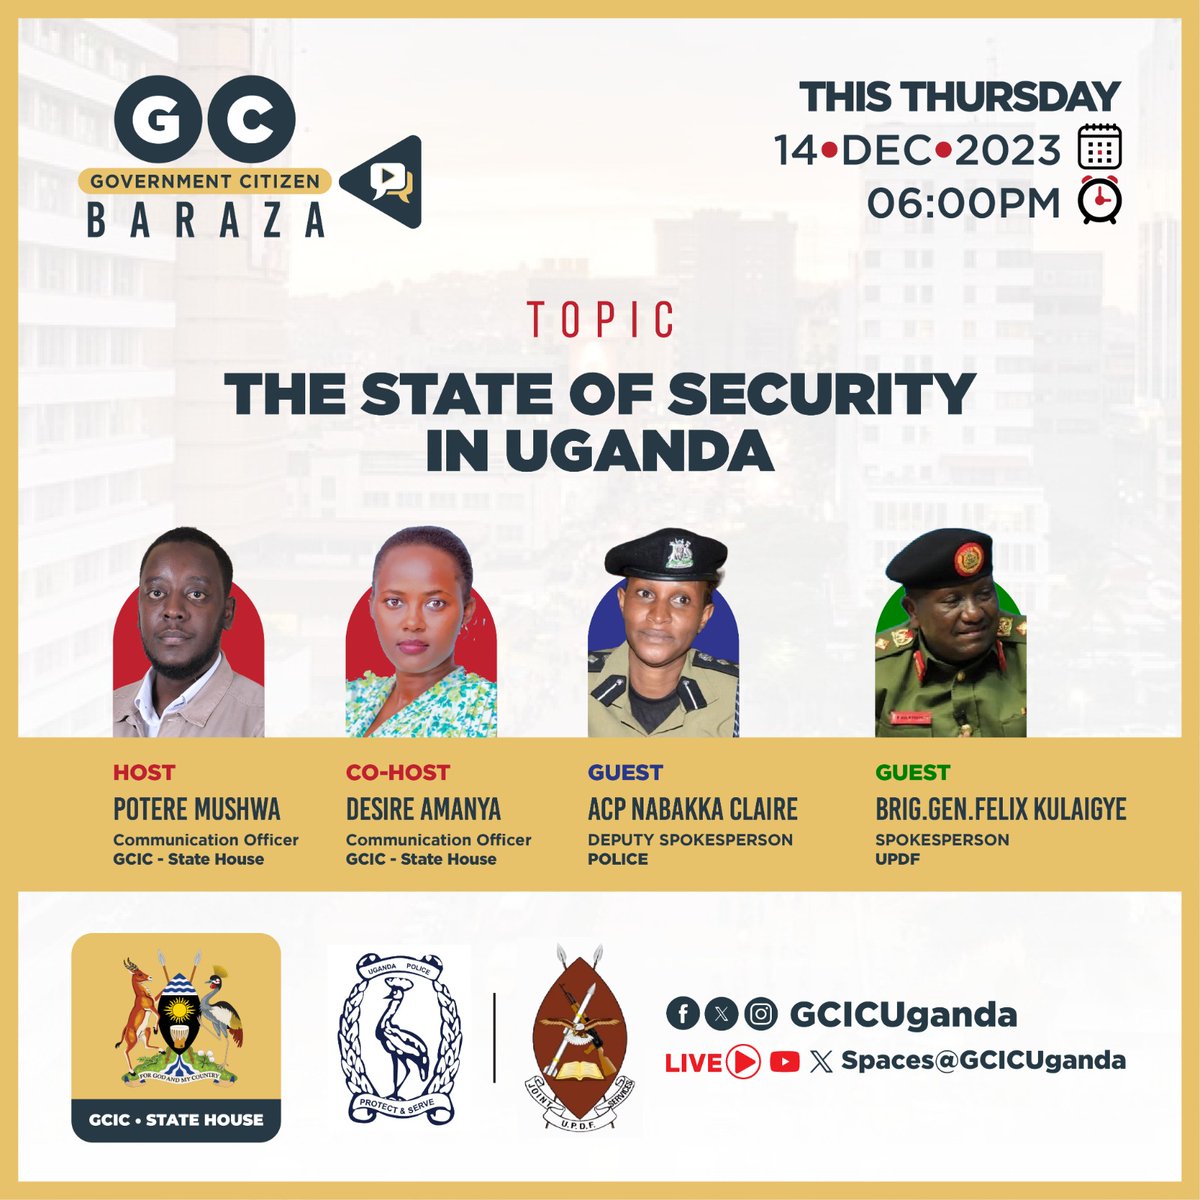 Today, @GCICUganda will be hosting @UPDFspokespersn and @PoliceUg deputy Spokesperson to discuss the security situation in the country at 6:00pm. Be part of this great discussion and share your experiences and concerns. #CitizenBaraza